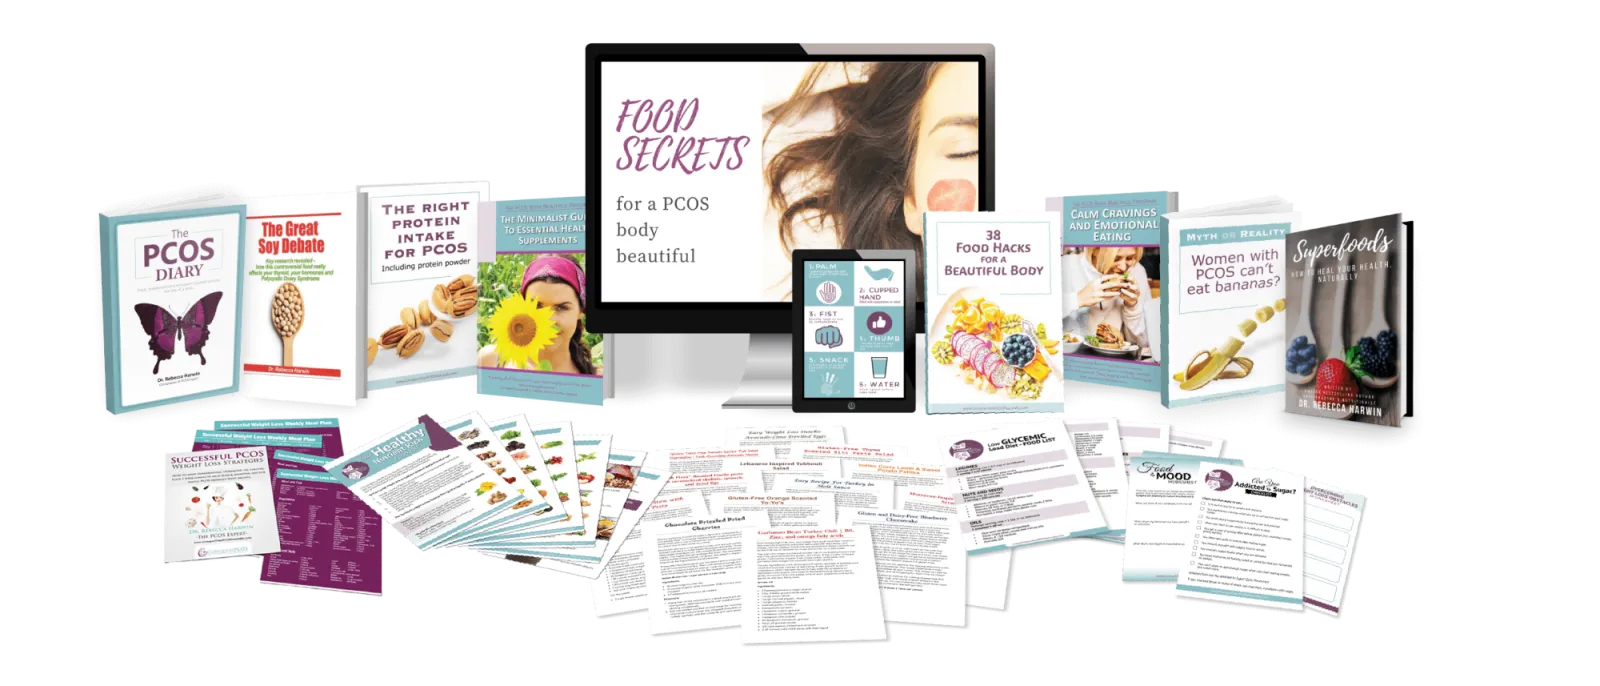 Food Secrets for a PCOS Body Beautiful